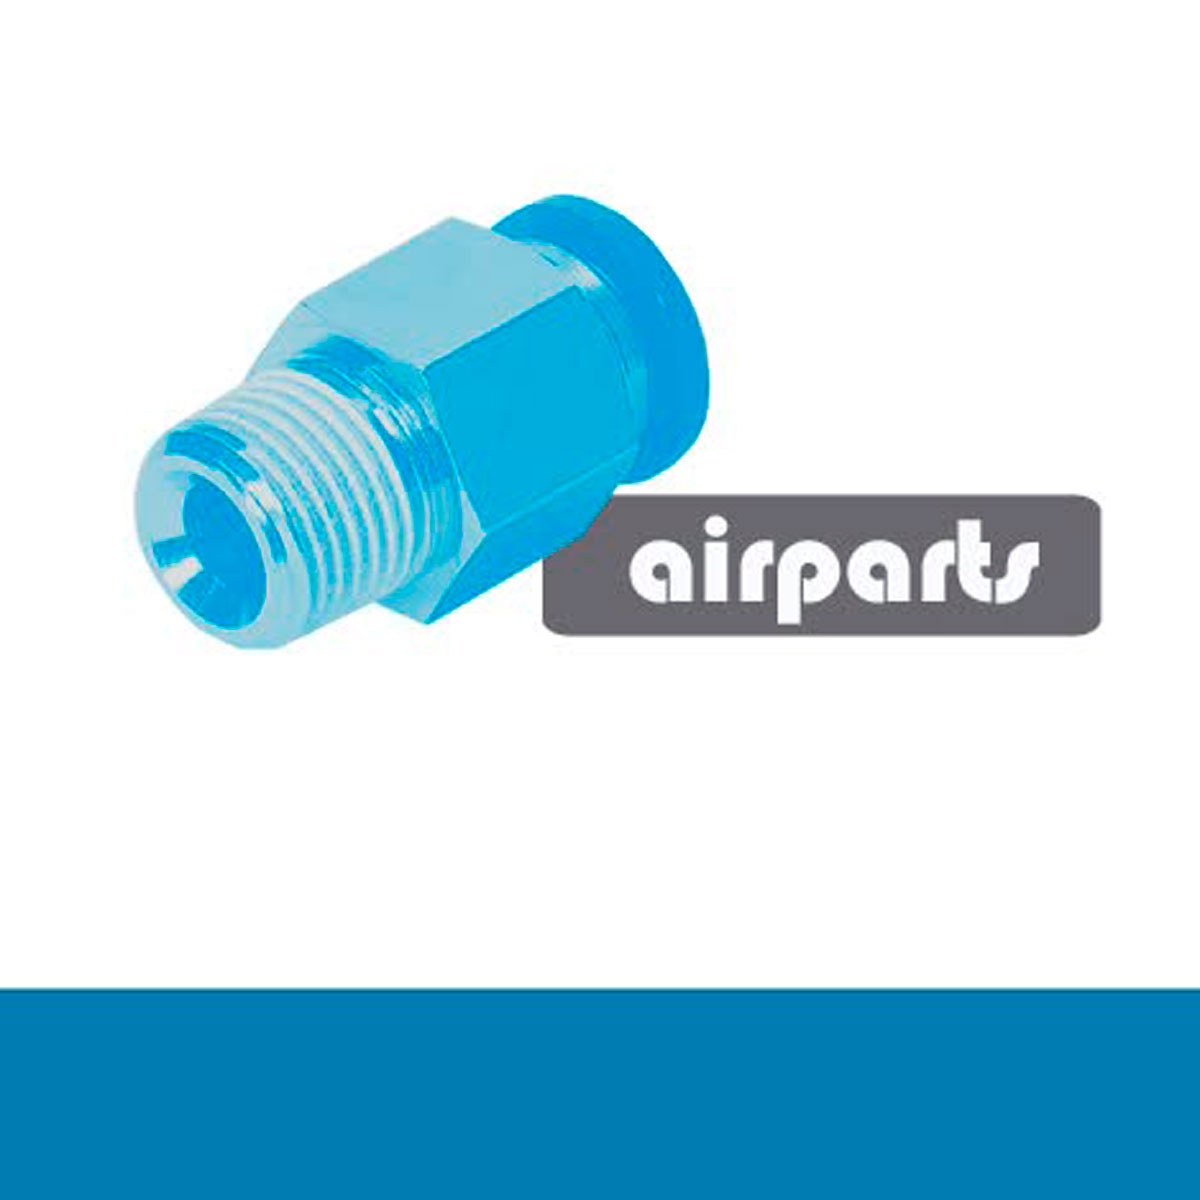 luchtbalg AirLift, SZ-55-20, 3mm koppeling